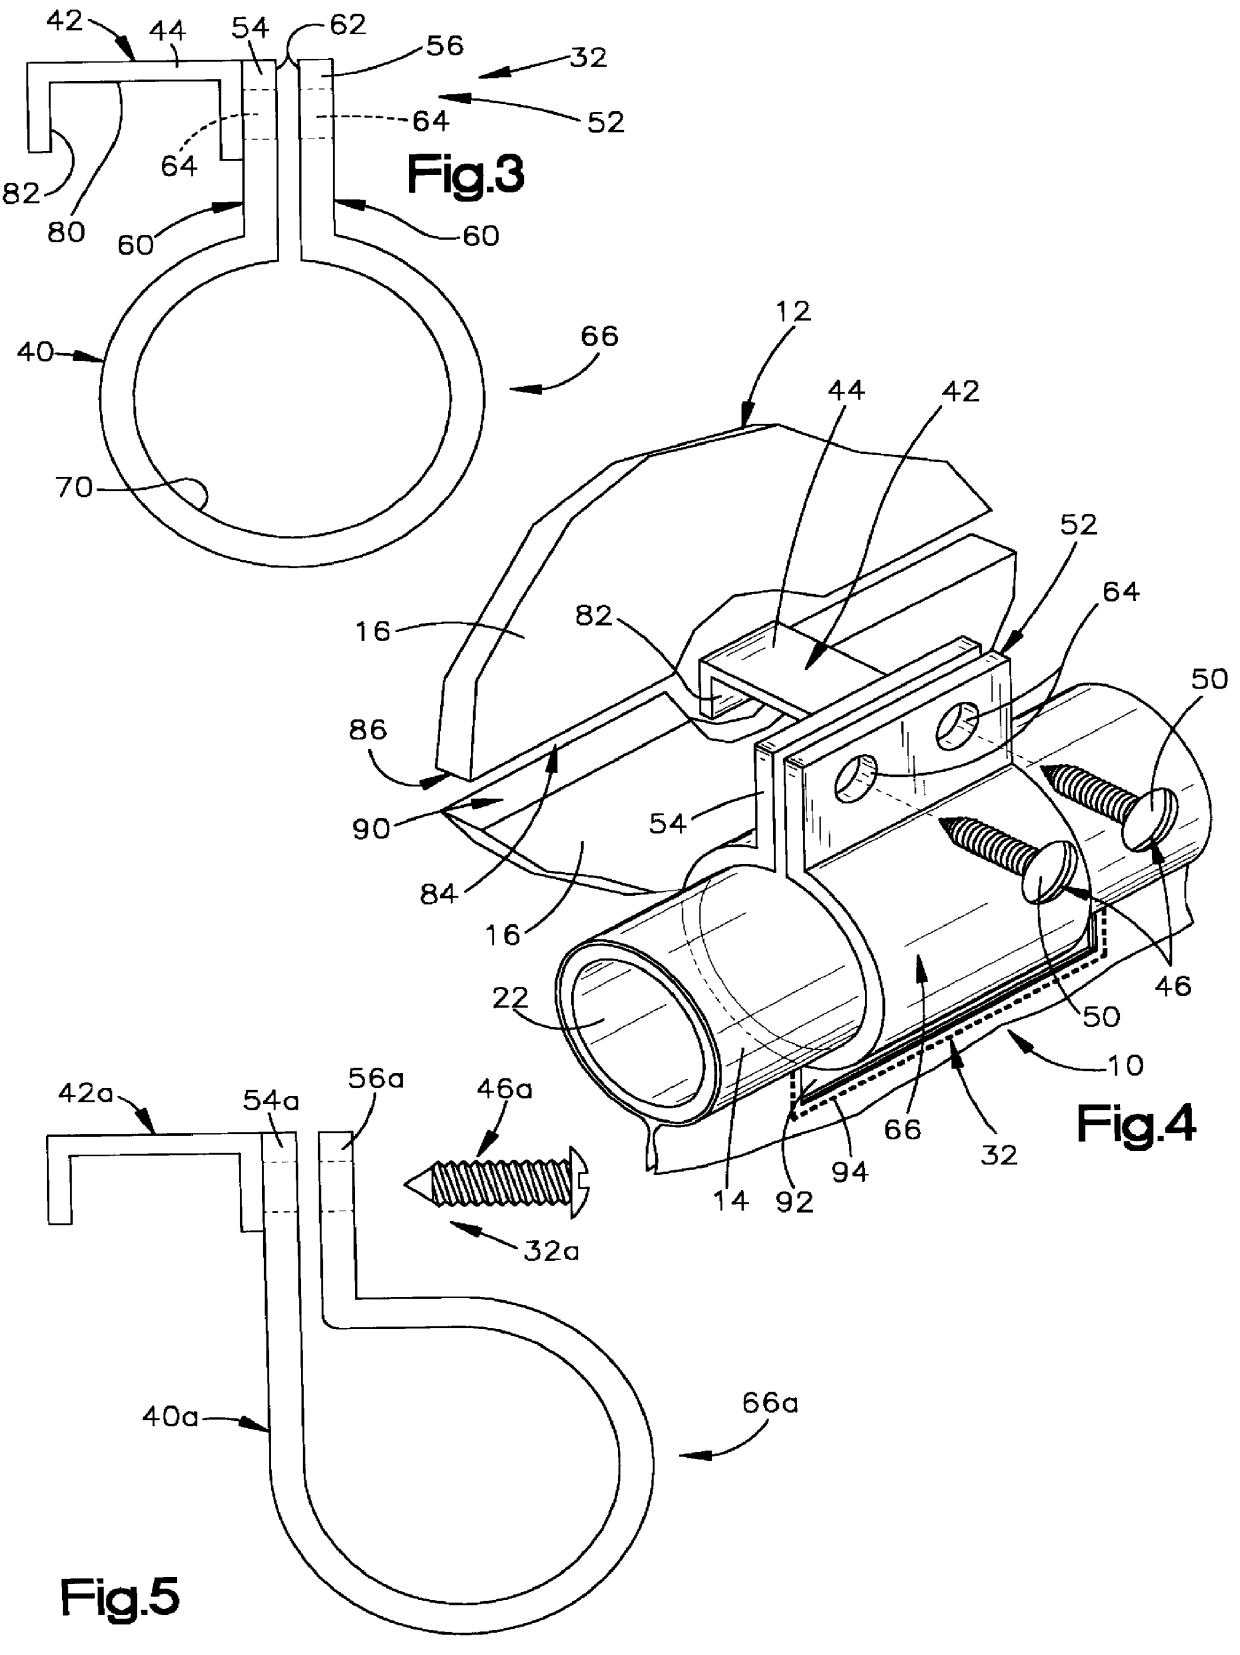 Support device for a vehicle occupant safety apparatus